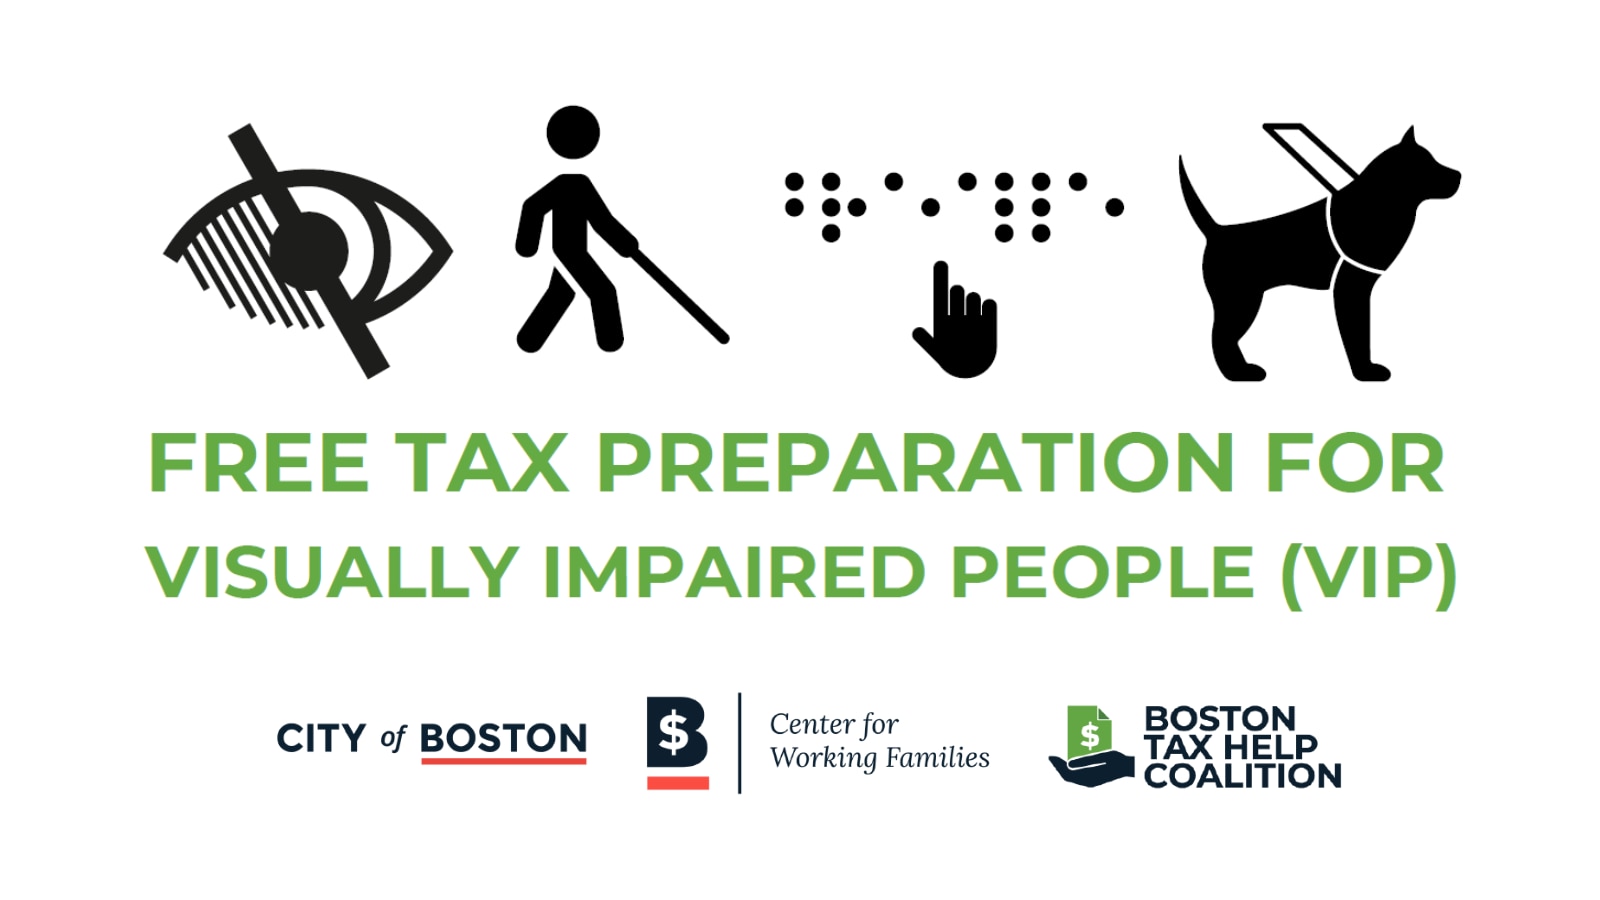 Free Tax Preparation for Visually Impaired People (VIP)